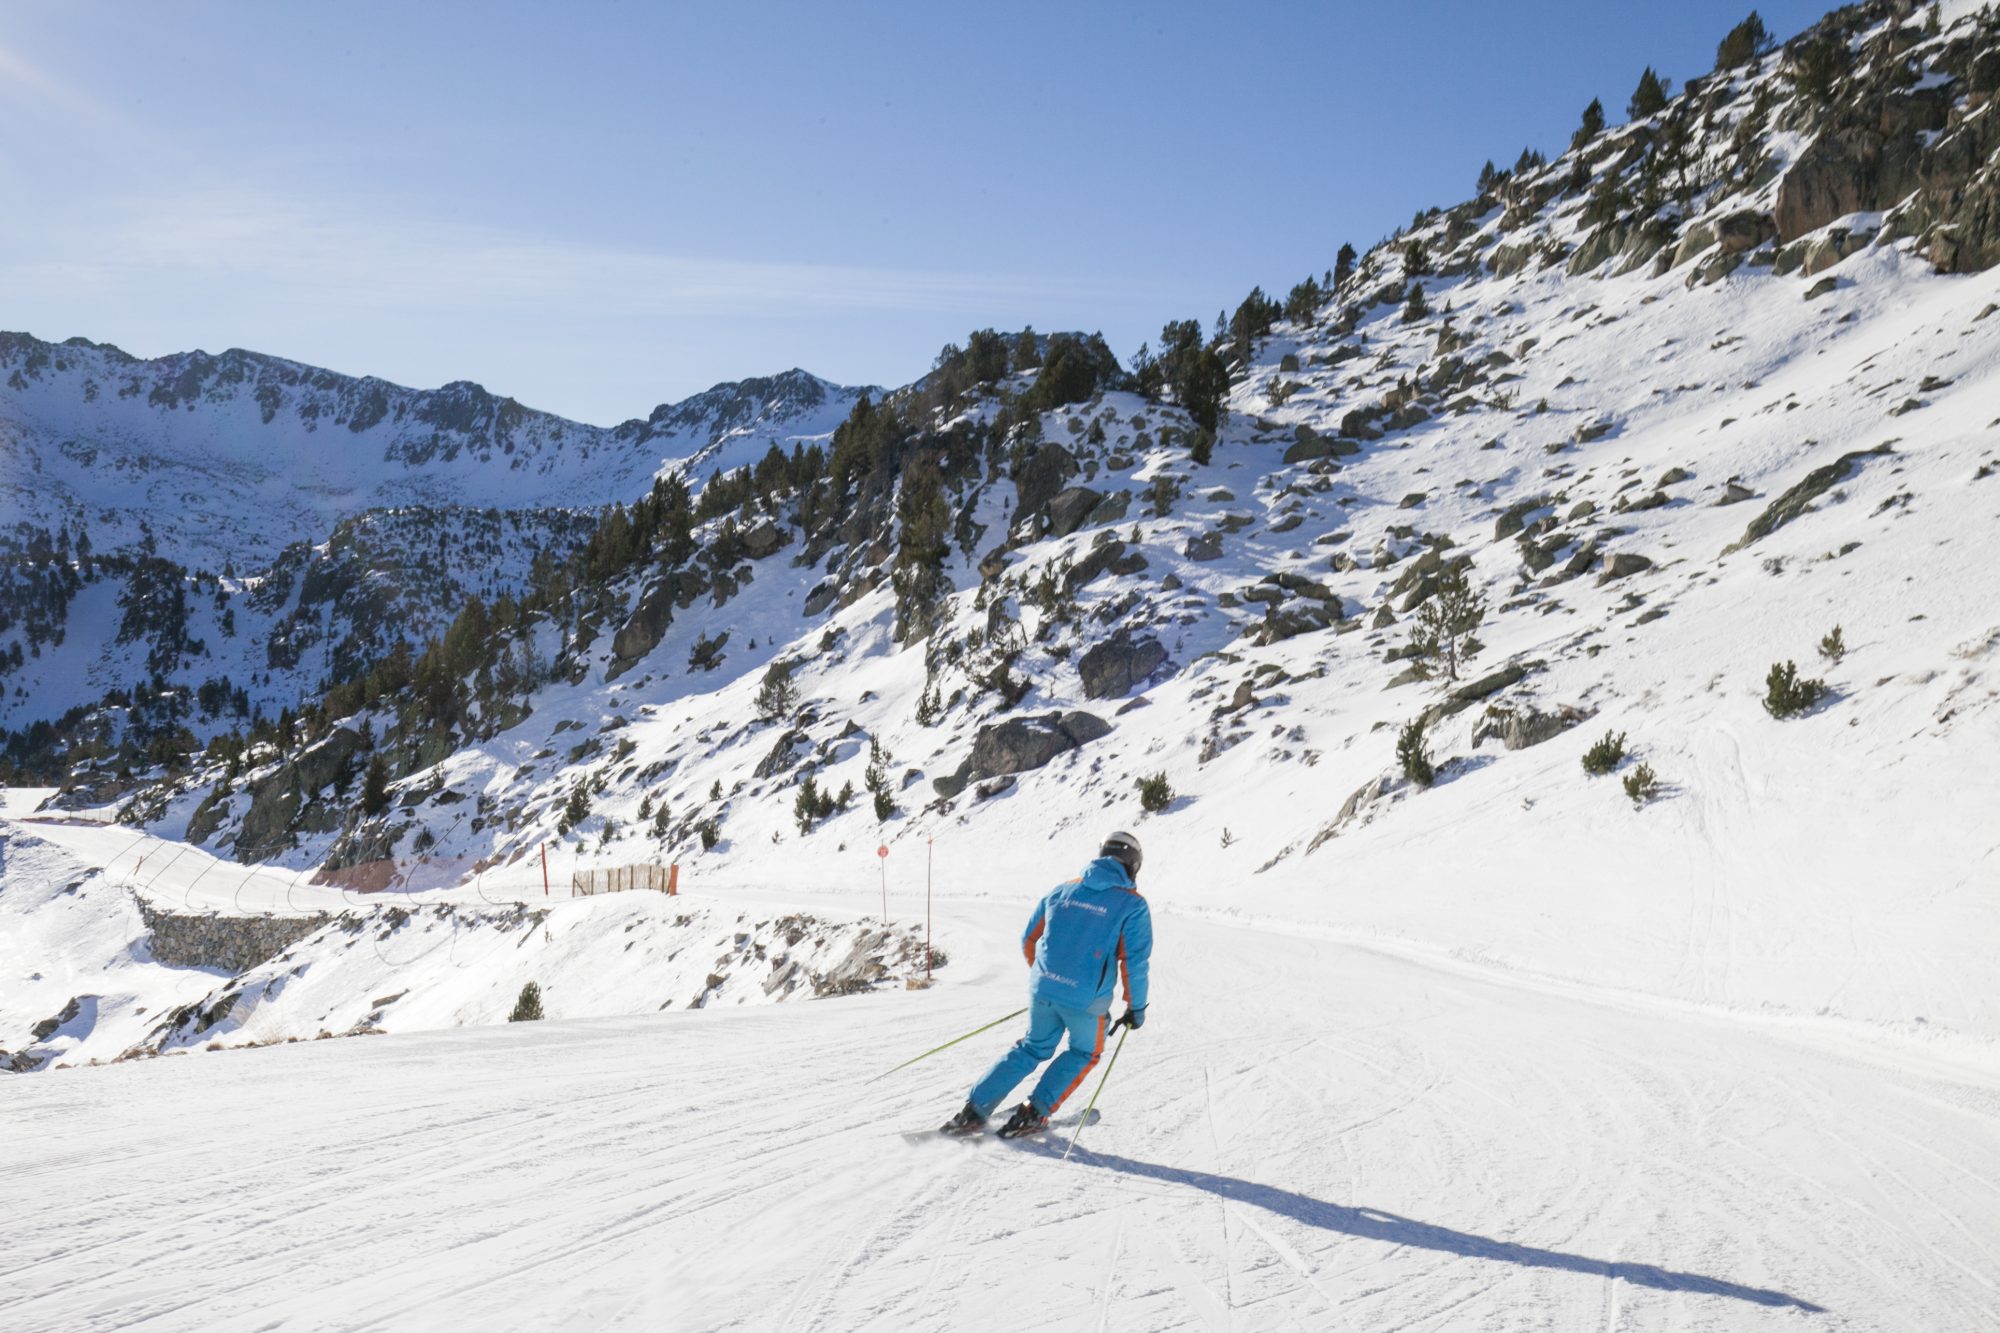 Photo: Grandvalira: 15 Jan 2019. Grandvalira heads into the weekend with more slopes open and a packed schedule of activities.